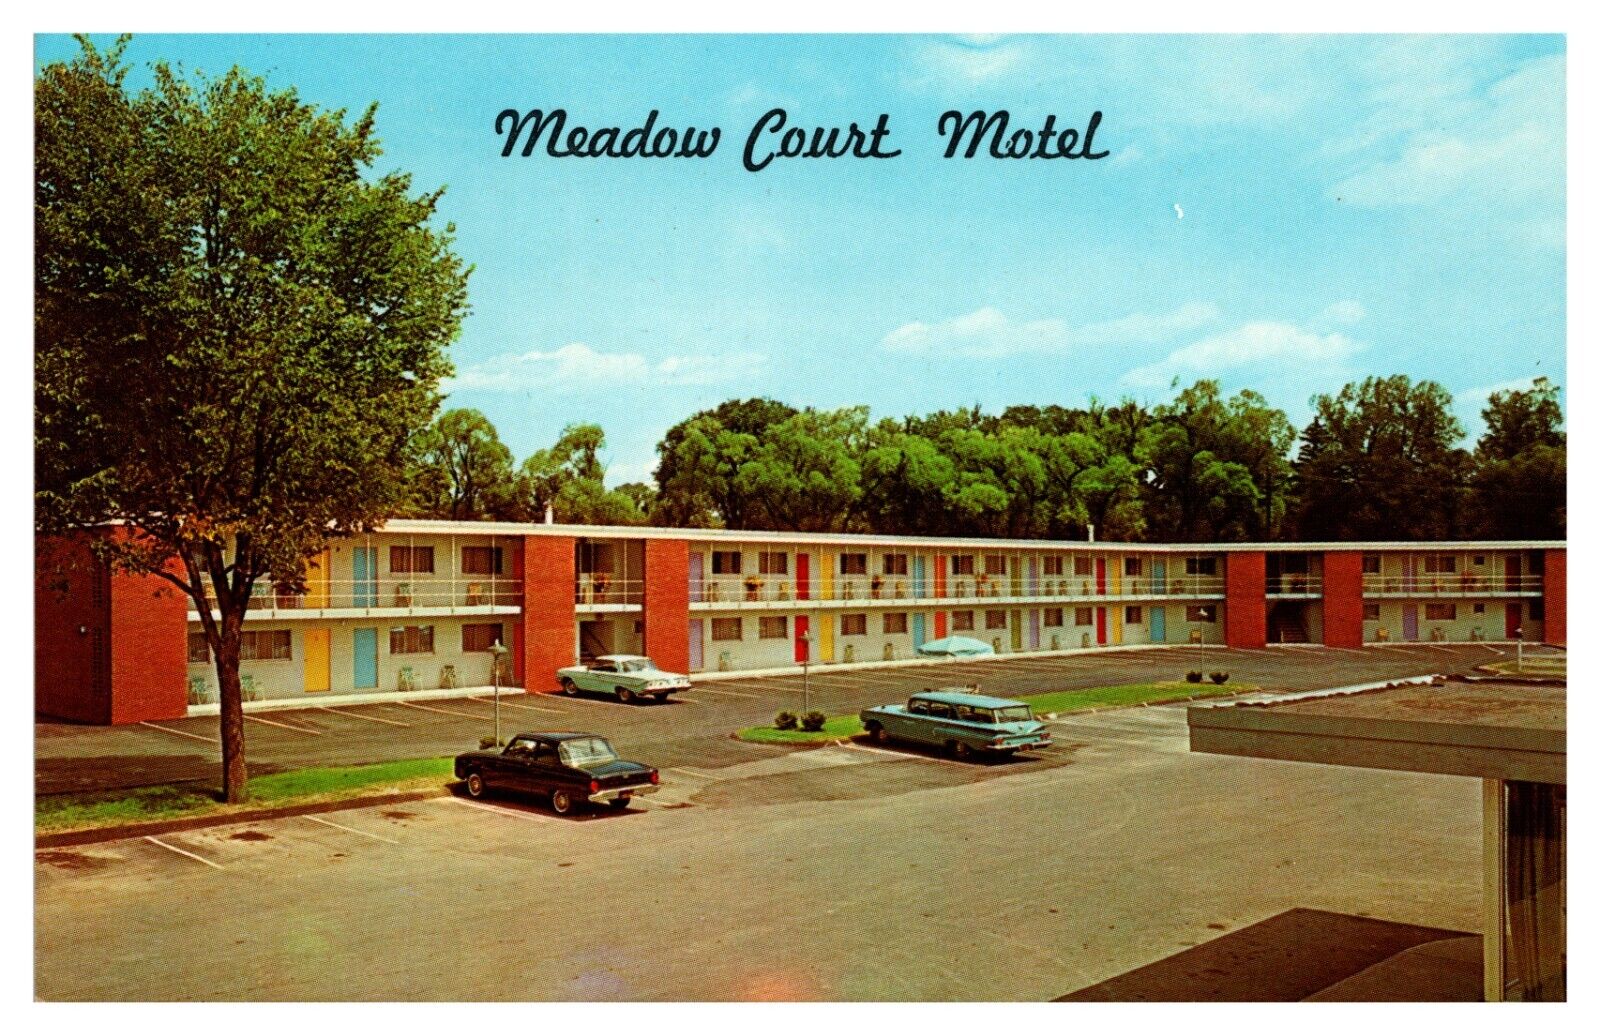 Meadow Court Motel Ithaca New York NY Retro Classic Cars Advertising Postcard